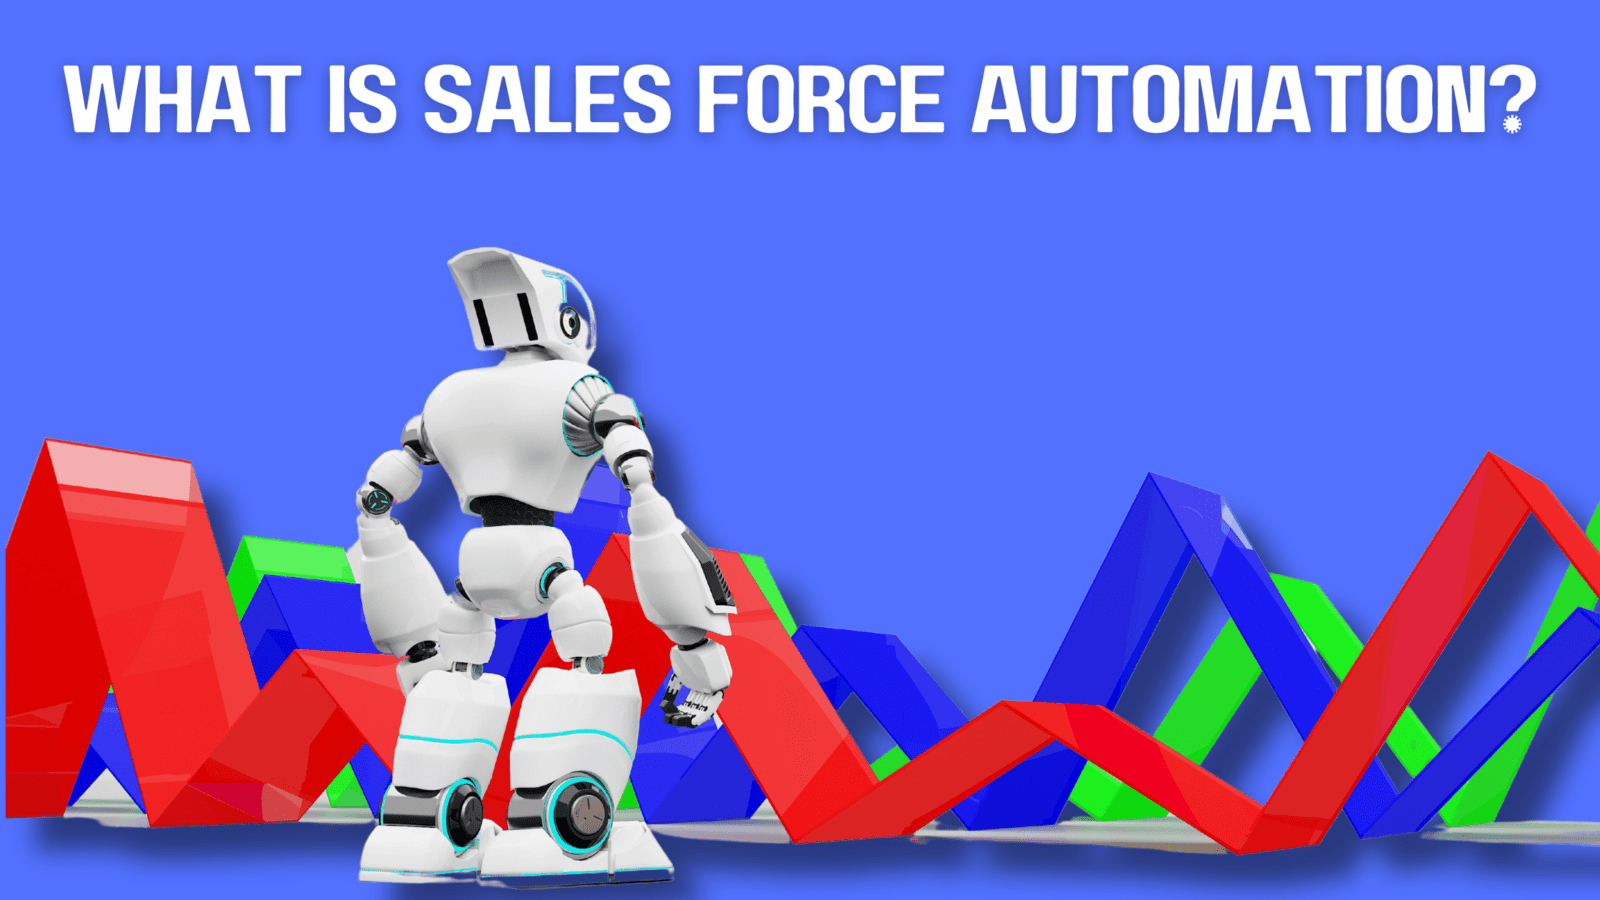 What is Sales Force Automation?